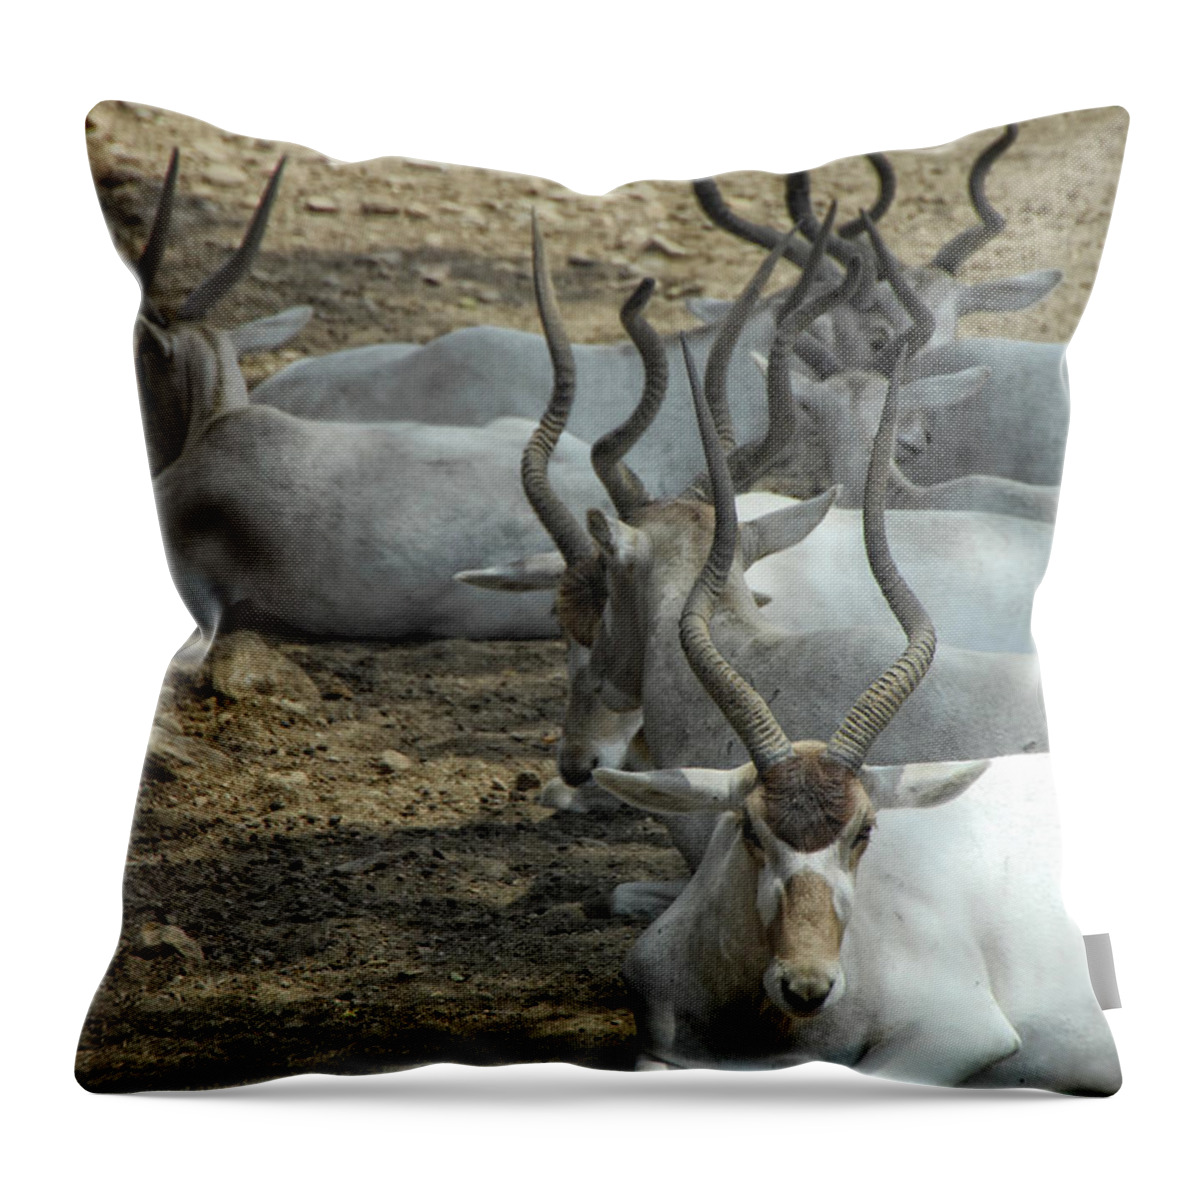 Addax Throw Pillow featuring the photograph Horney by Donna Blackhall